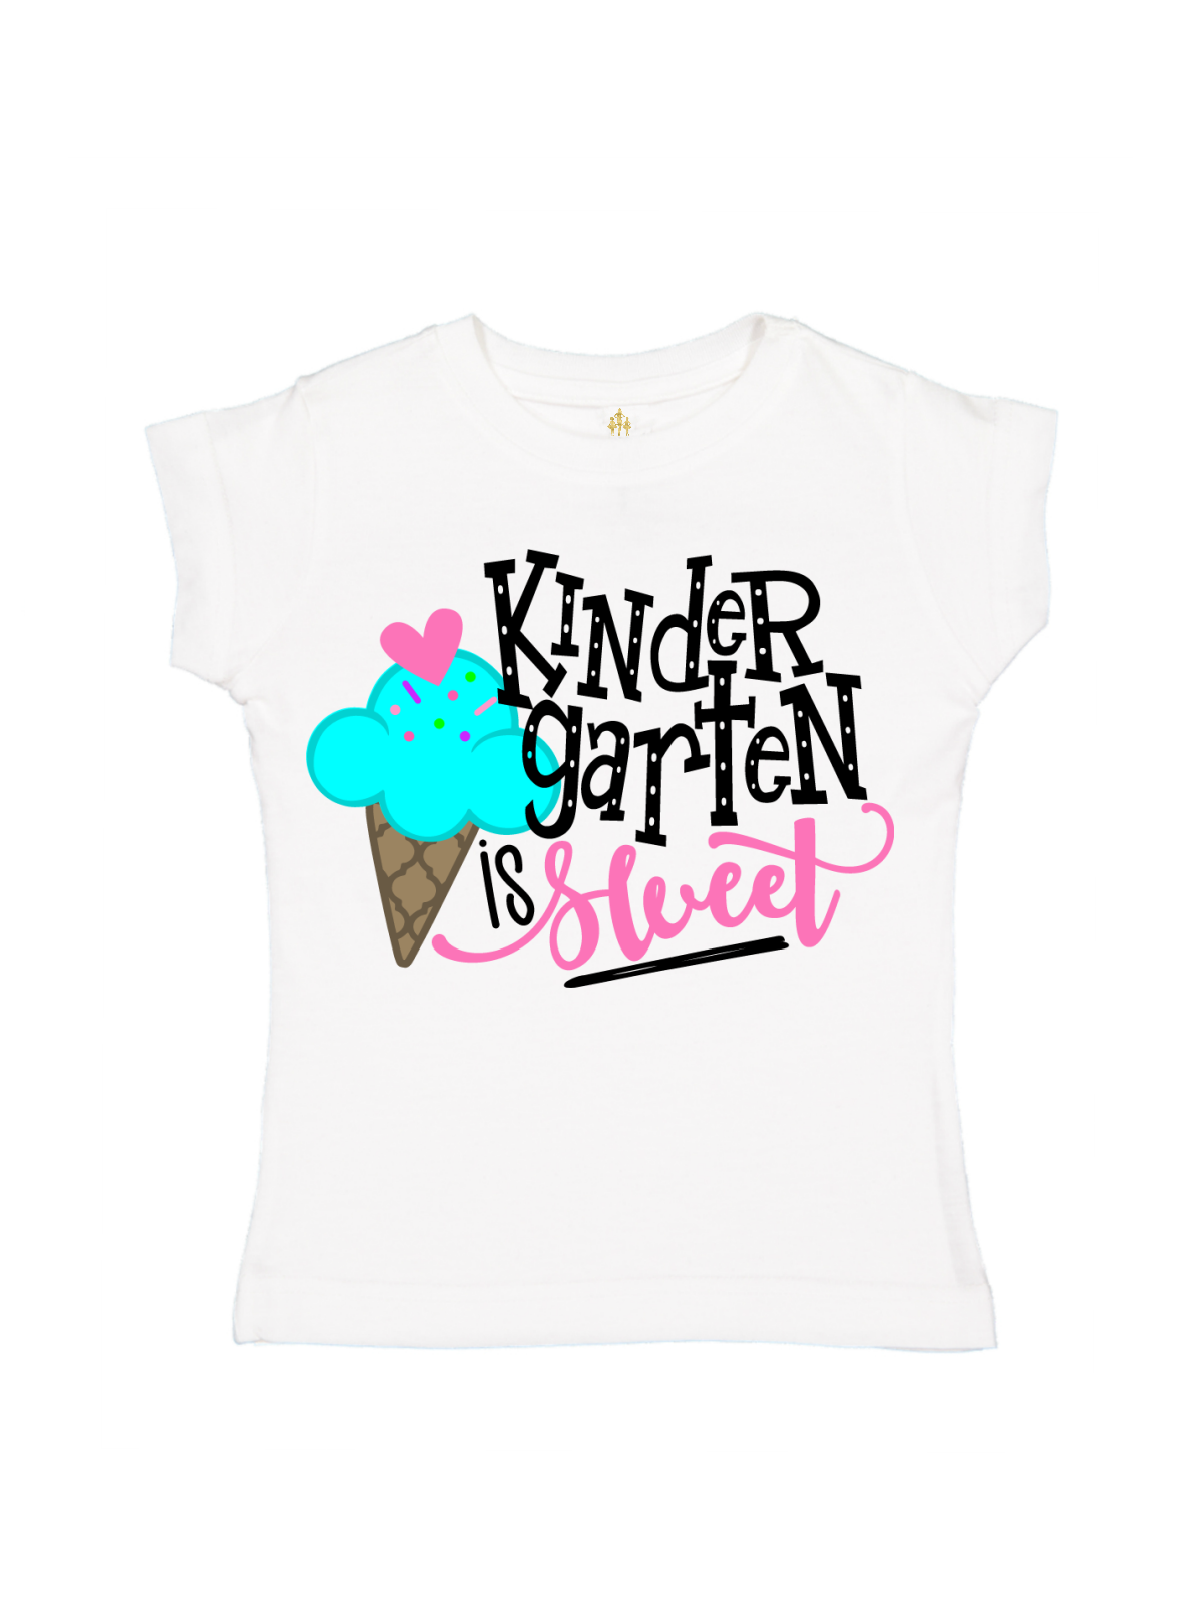 Kindergarten is Sweet Girls First Day of School Shirts in Black, White, Blue, and Pink